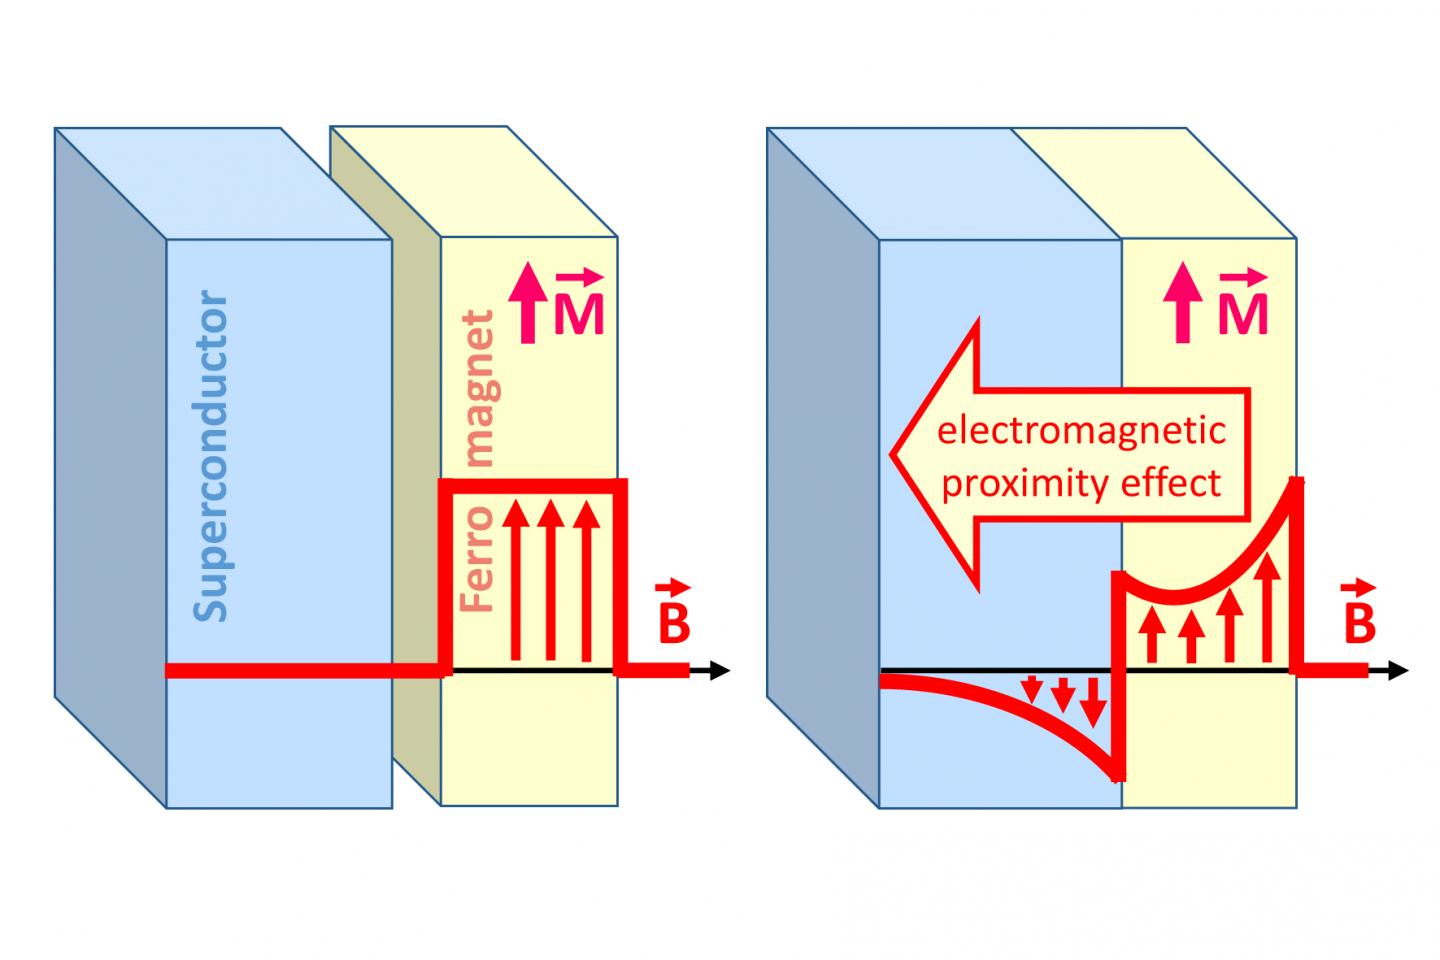 Sketch of the Magnetic Effects the Superconductor-Ferromagnet Bilayer